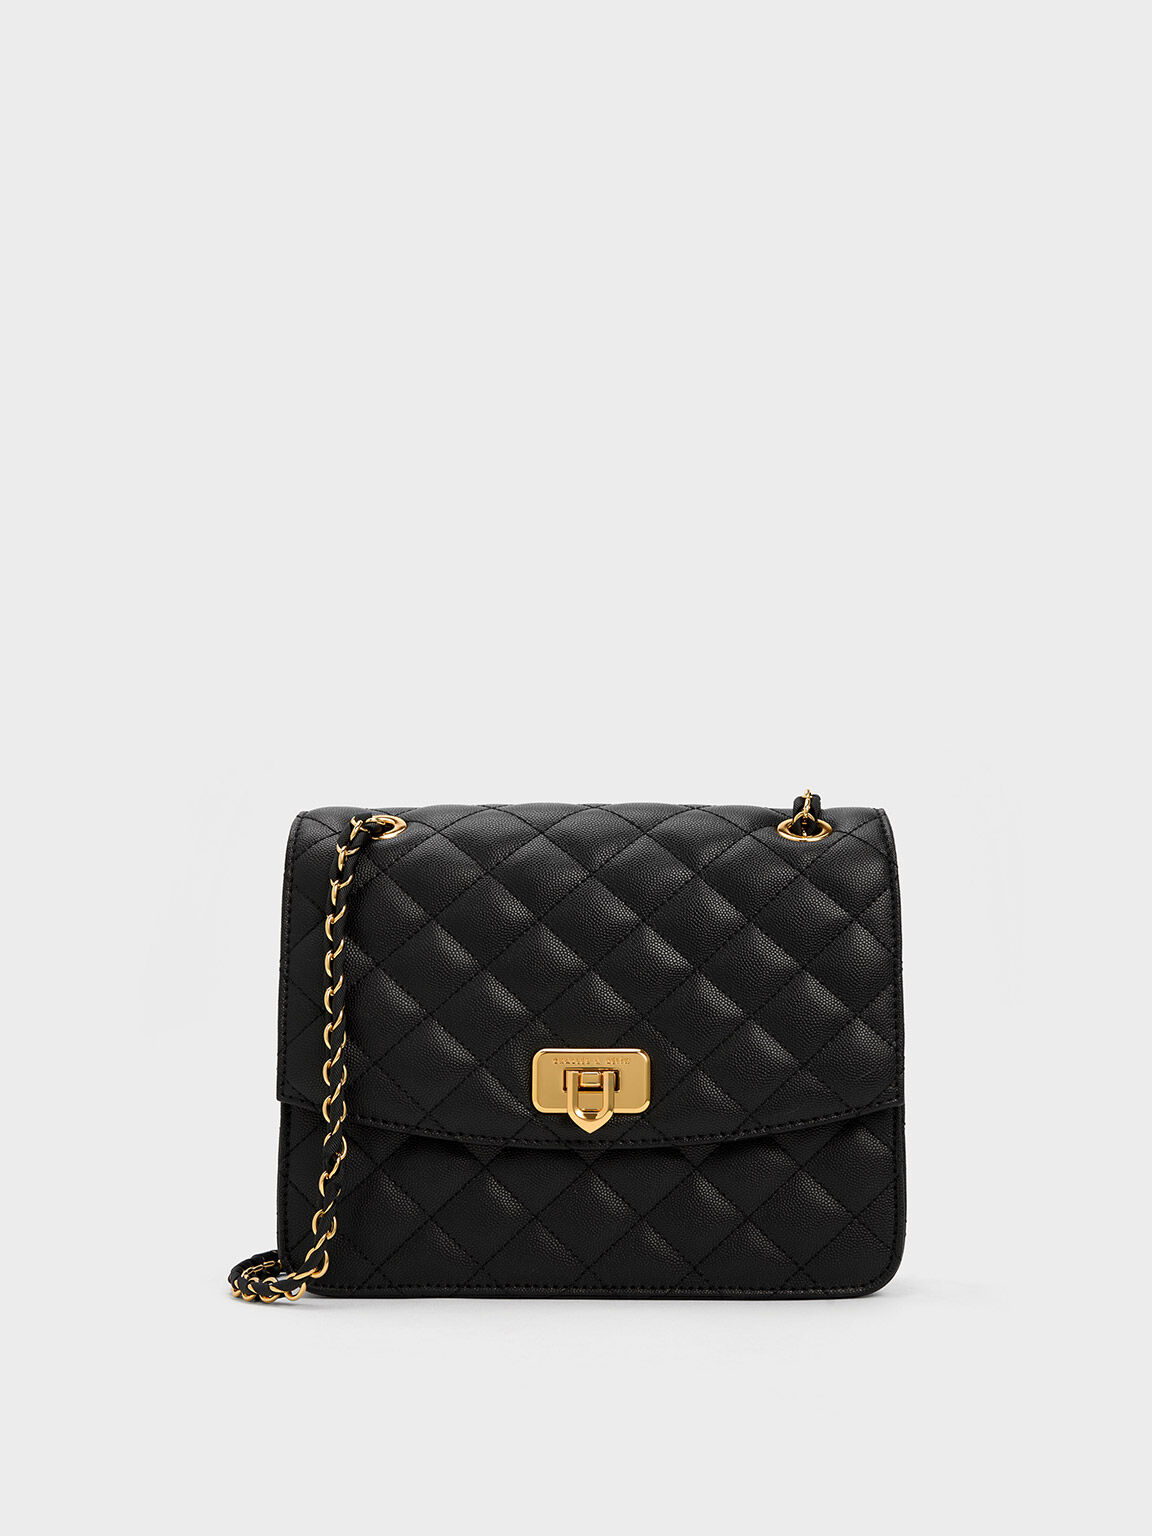 Black Cressida Quilted Chain Strap Bag - CHARLES & KEITH PA